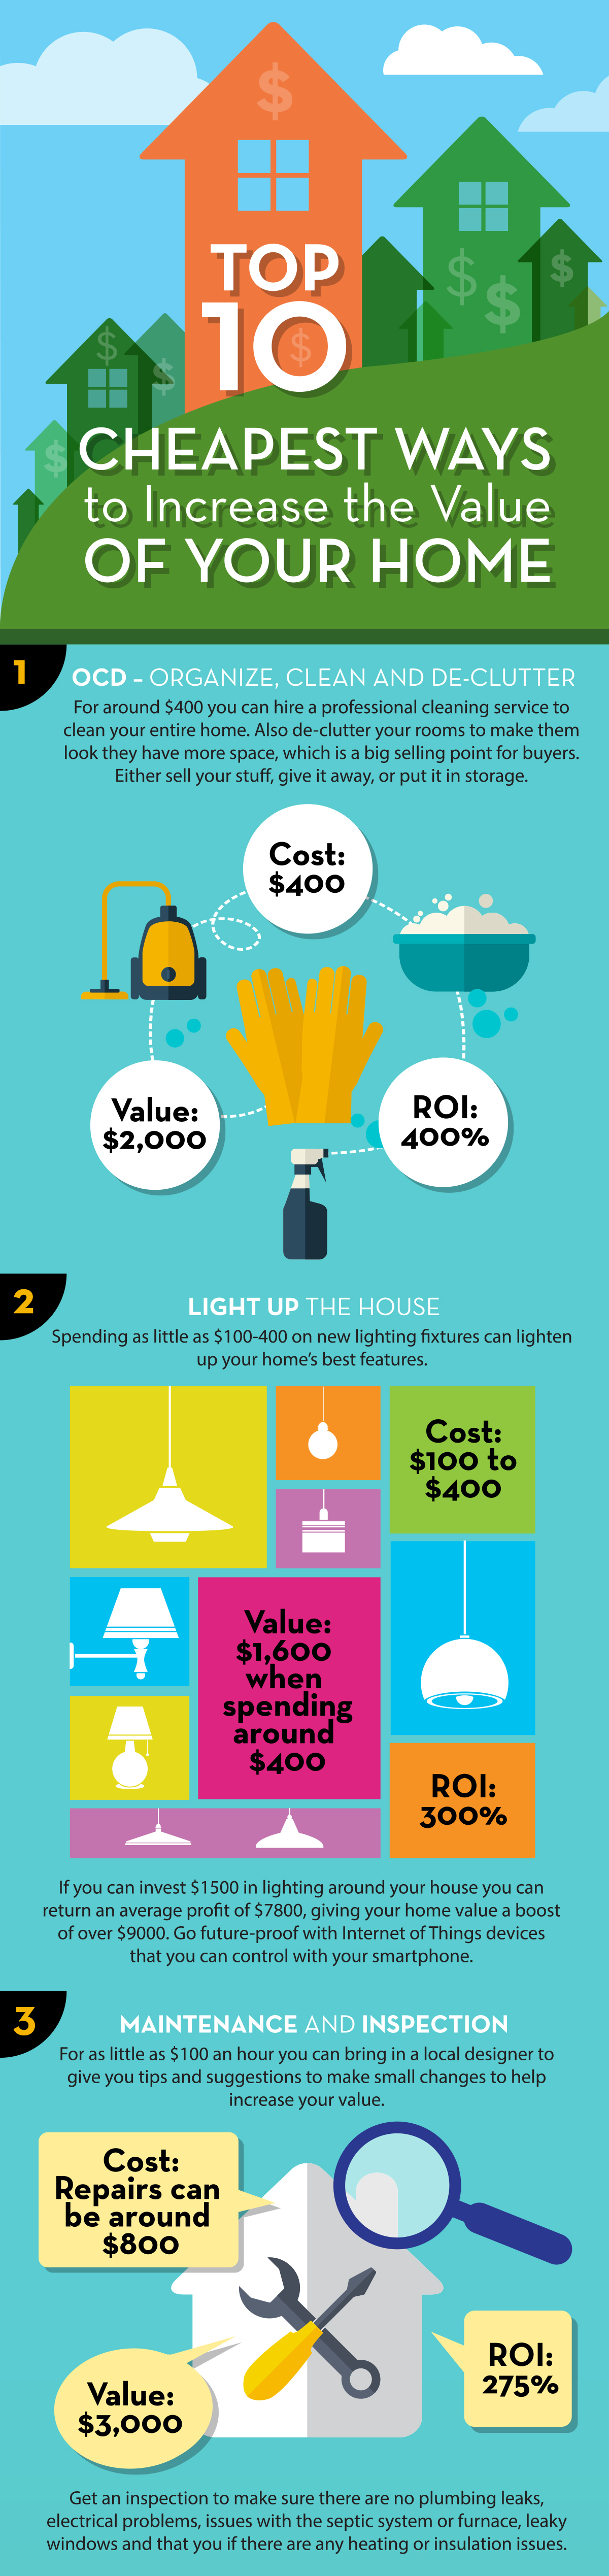 increase-the-value-of-your-home